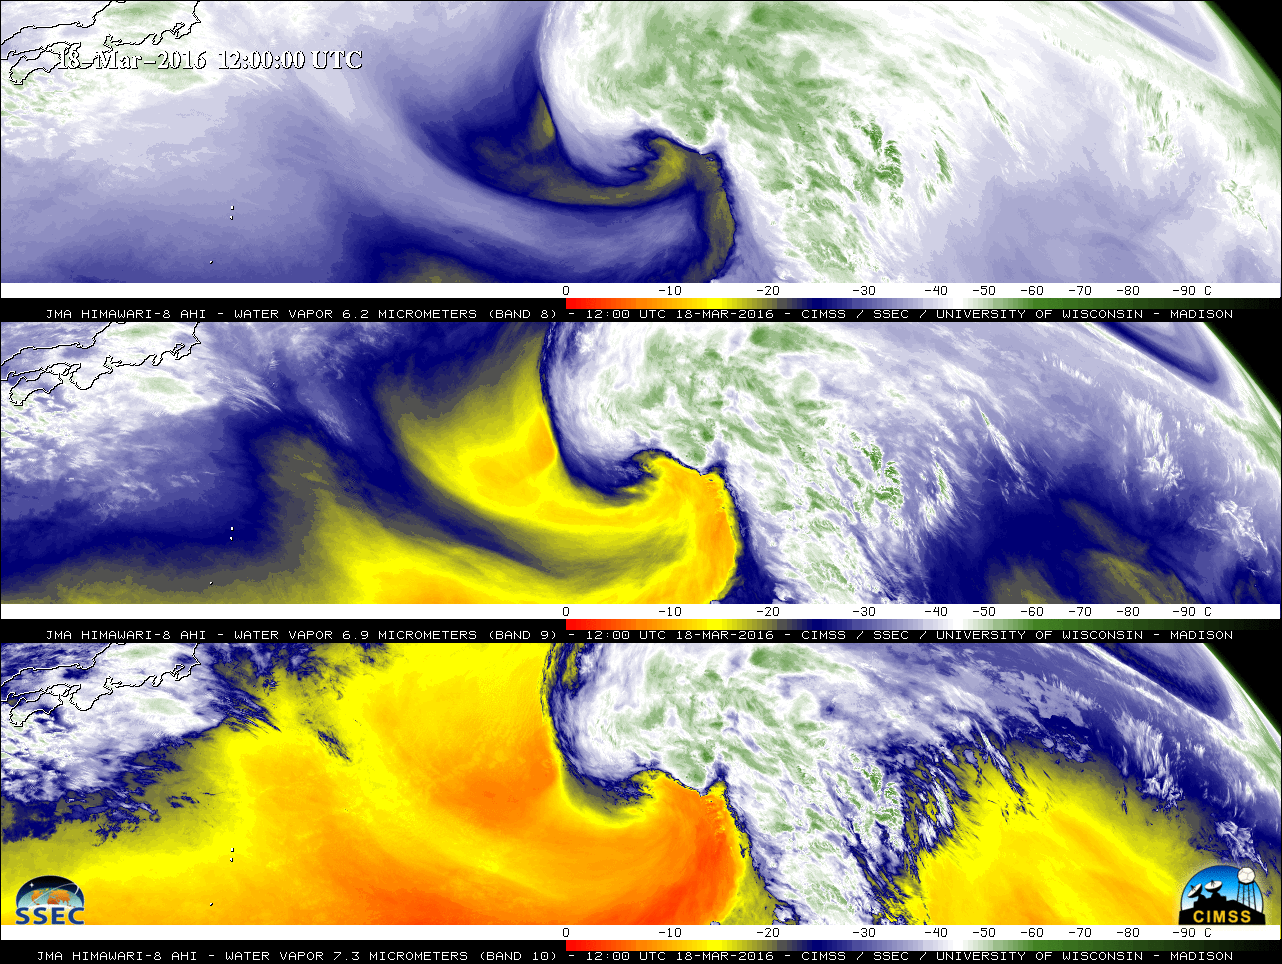 Himawari-8 Water Vapor images: 6.2 µm (top), 6.9 µm (middle), and 7.3 µm (bottom) - [click to play MP4 animation]